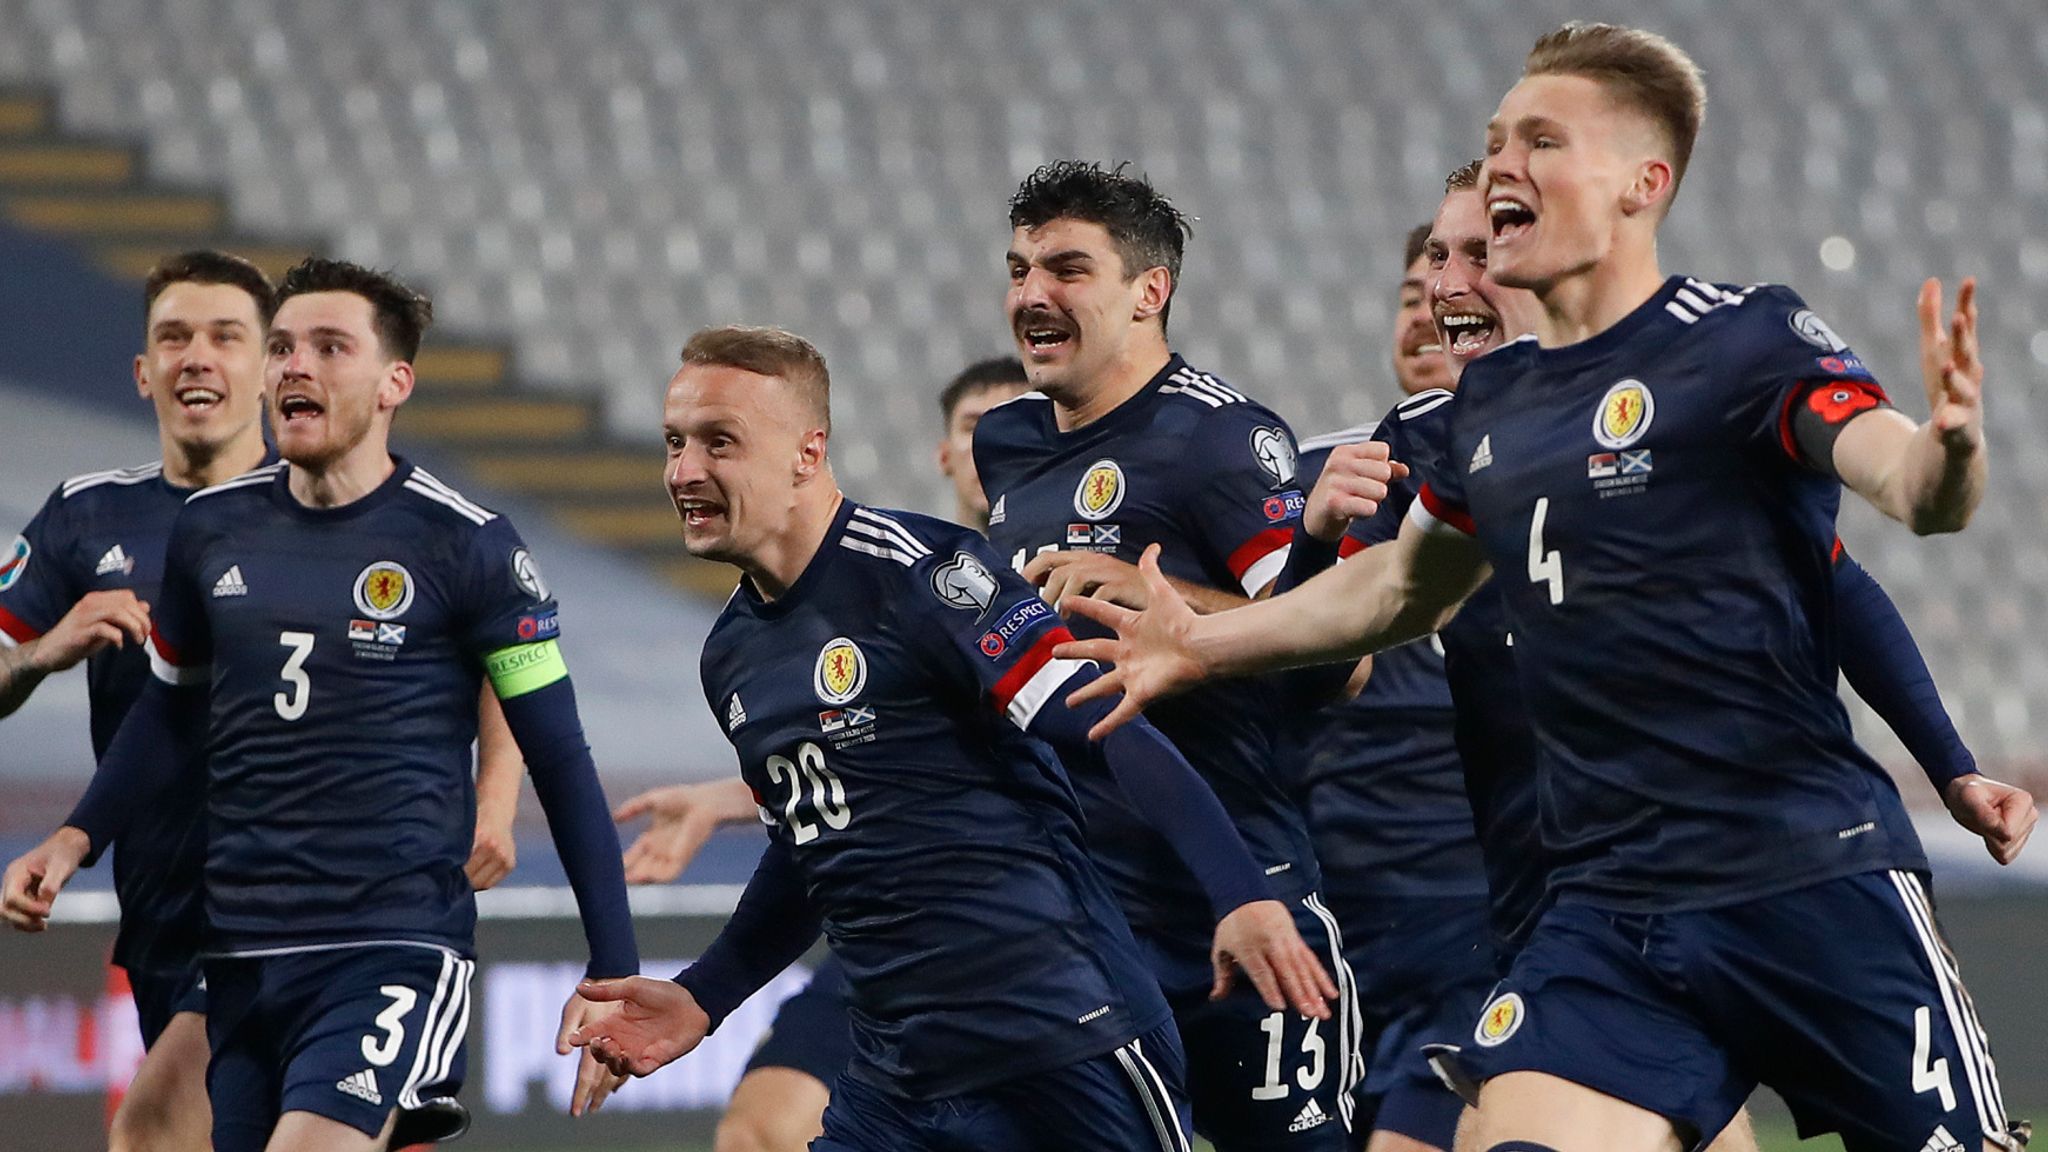 Euro 2020: Scotland Qualify For First Major Tournament In 23 Years